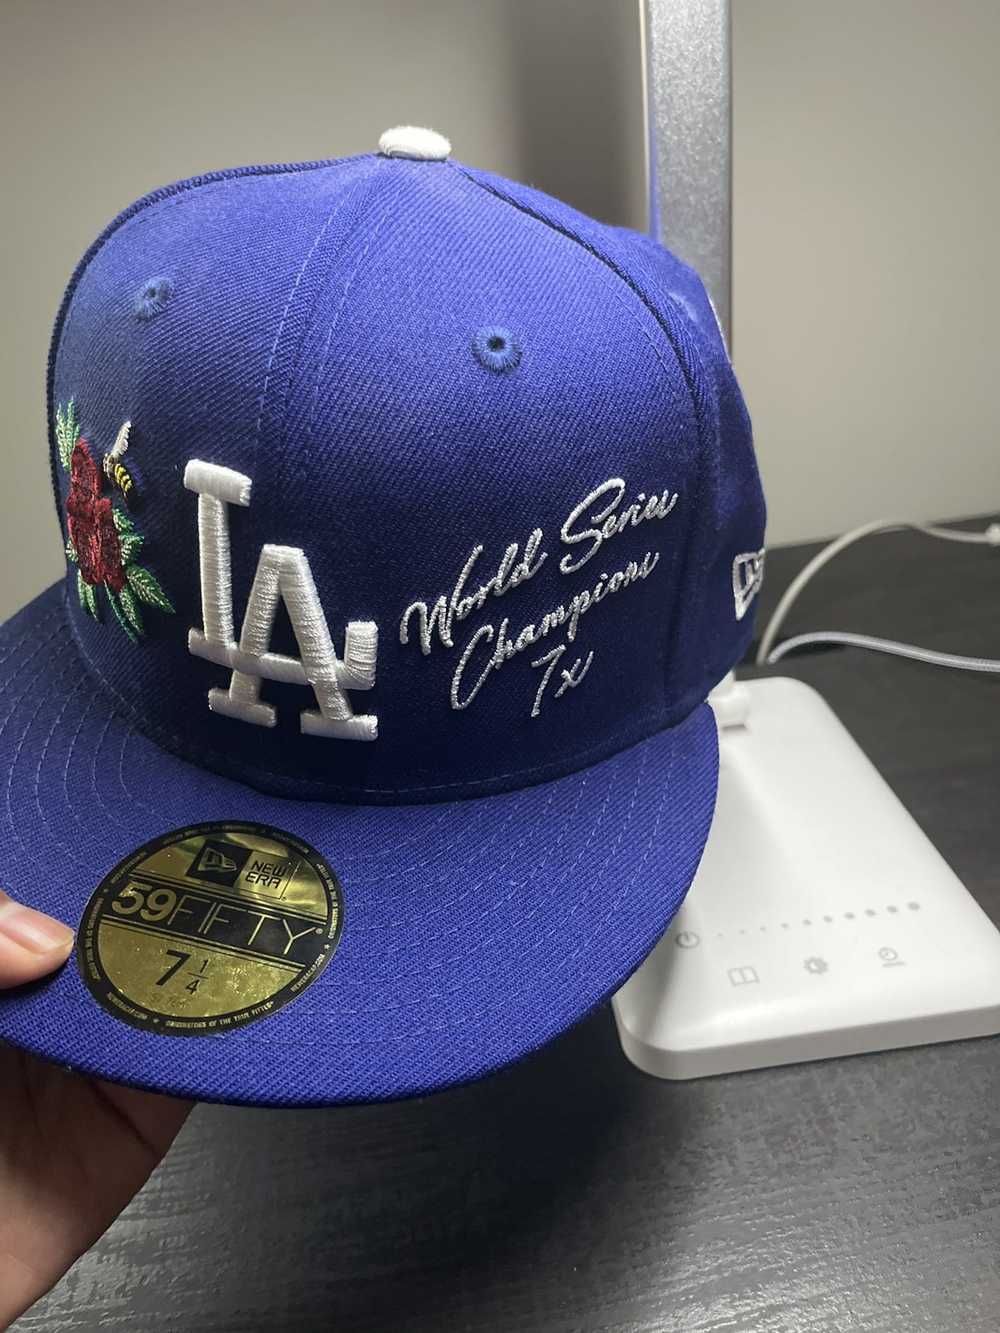 Black Los Angeles Dodgers Icy blue Bottom 2020 World Champions New Era  59Fifty Fitted